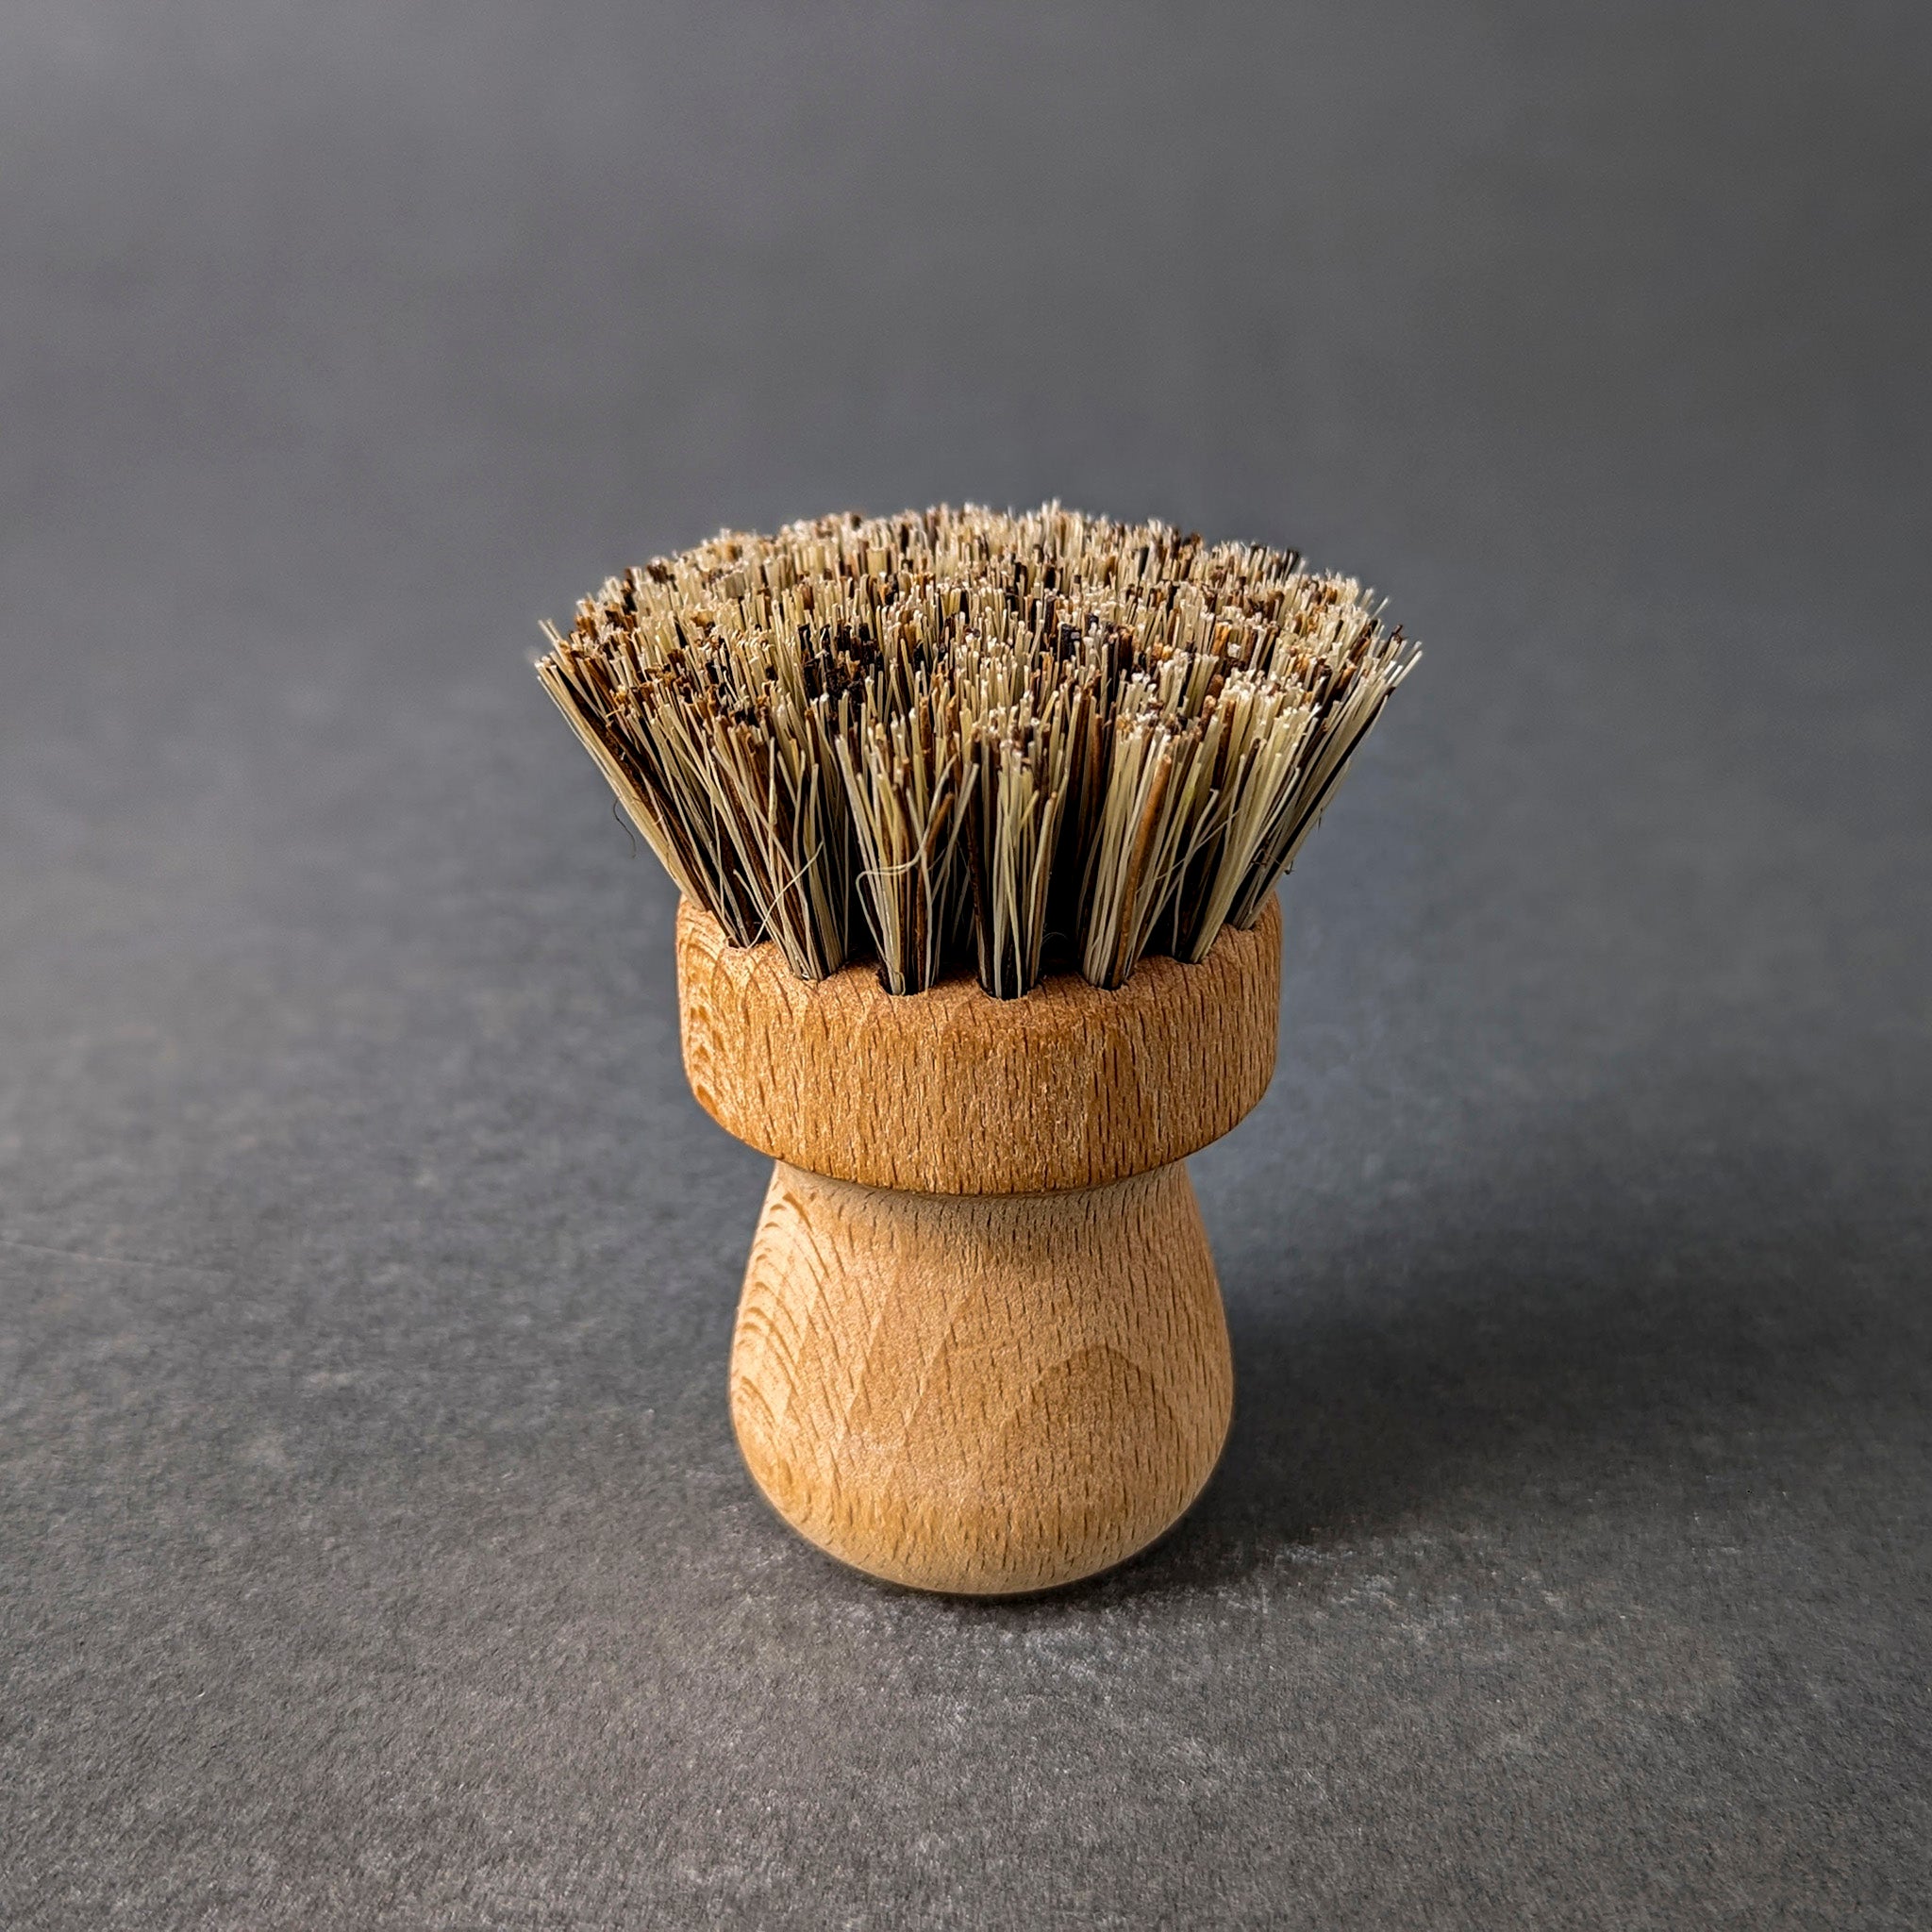 bristled pot and pan brush with wooden handle standing upward